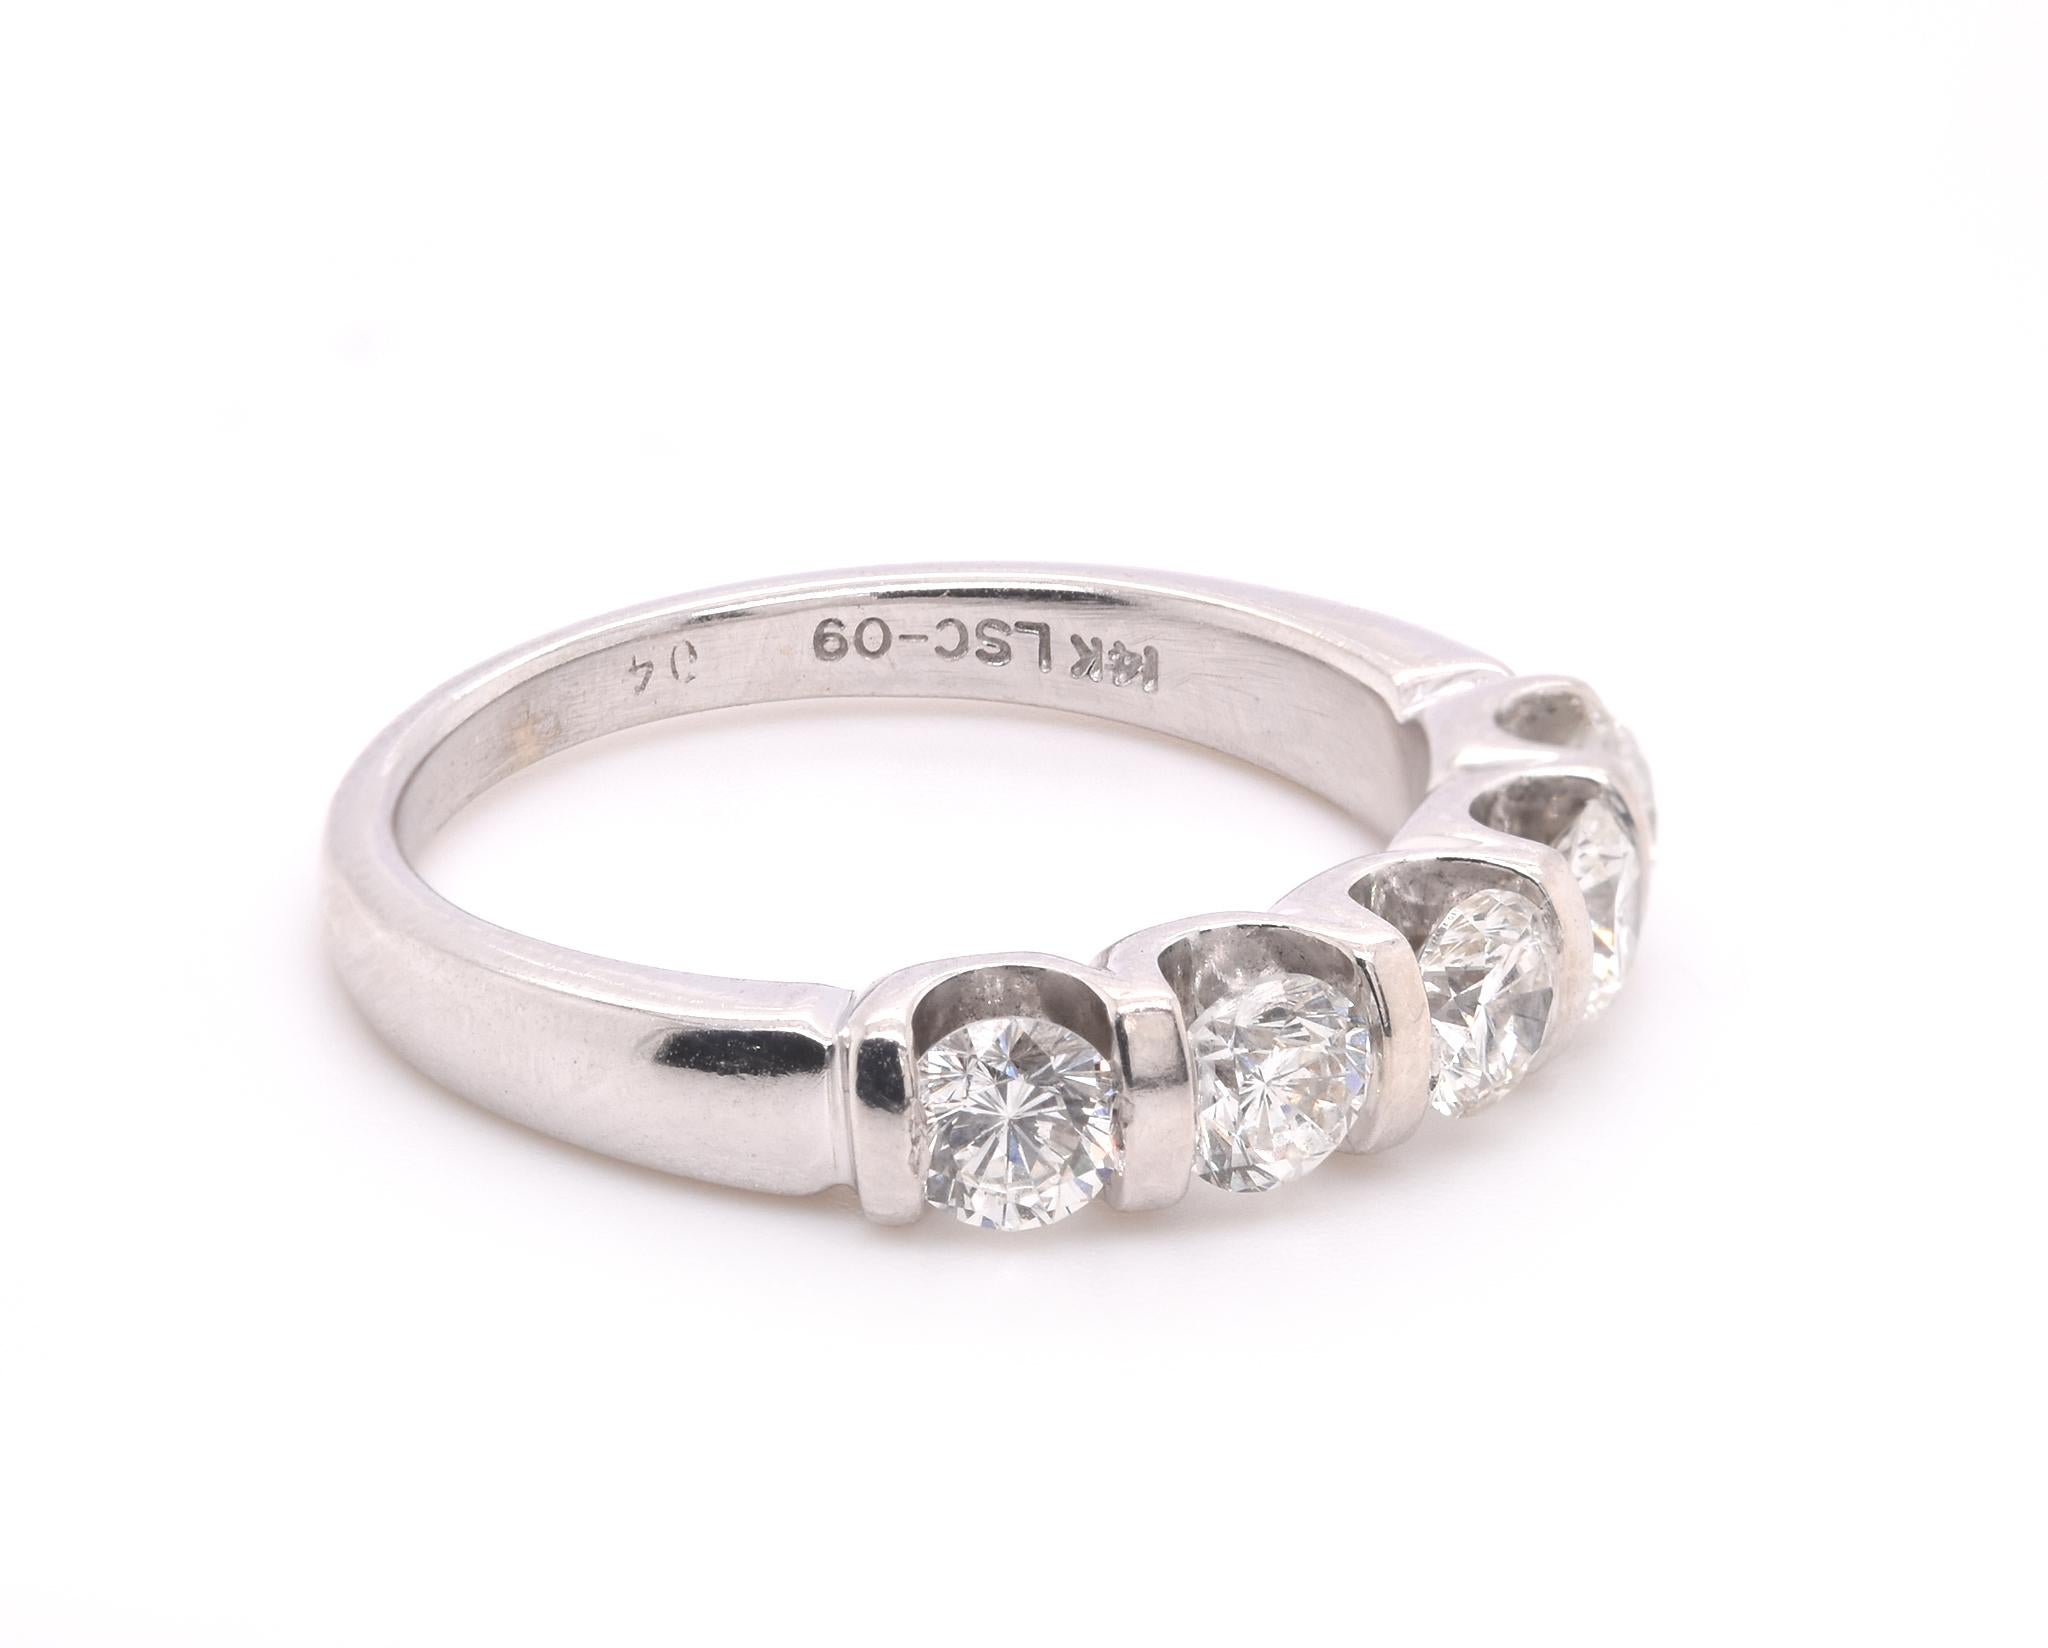 Designer: custom 
Material: 14K white gold
Diamonds: 5 round brilliant cut = 1.00cttw
Color: H
Clarity: VS1
Ring Size: 6.75
Dimensions: ring is 3mm wide
Weight: 4.20 grams